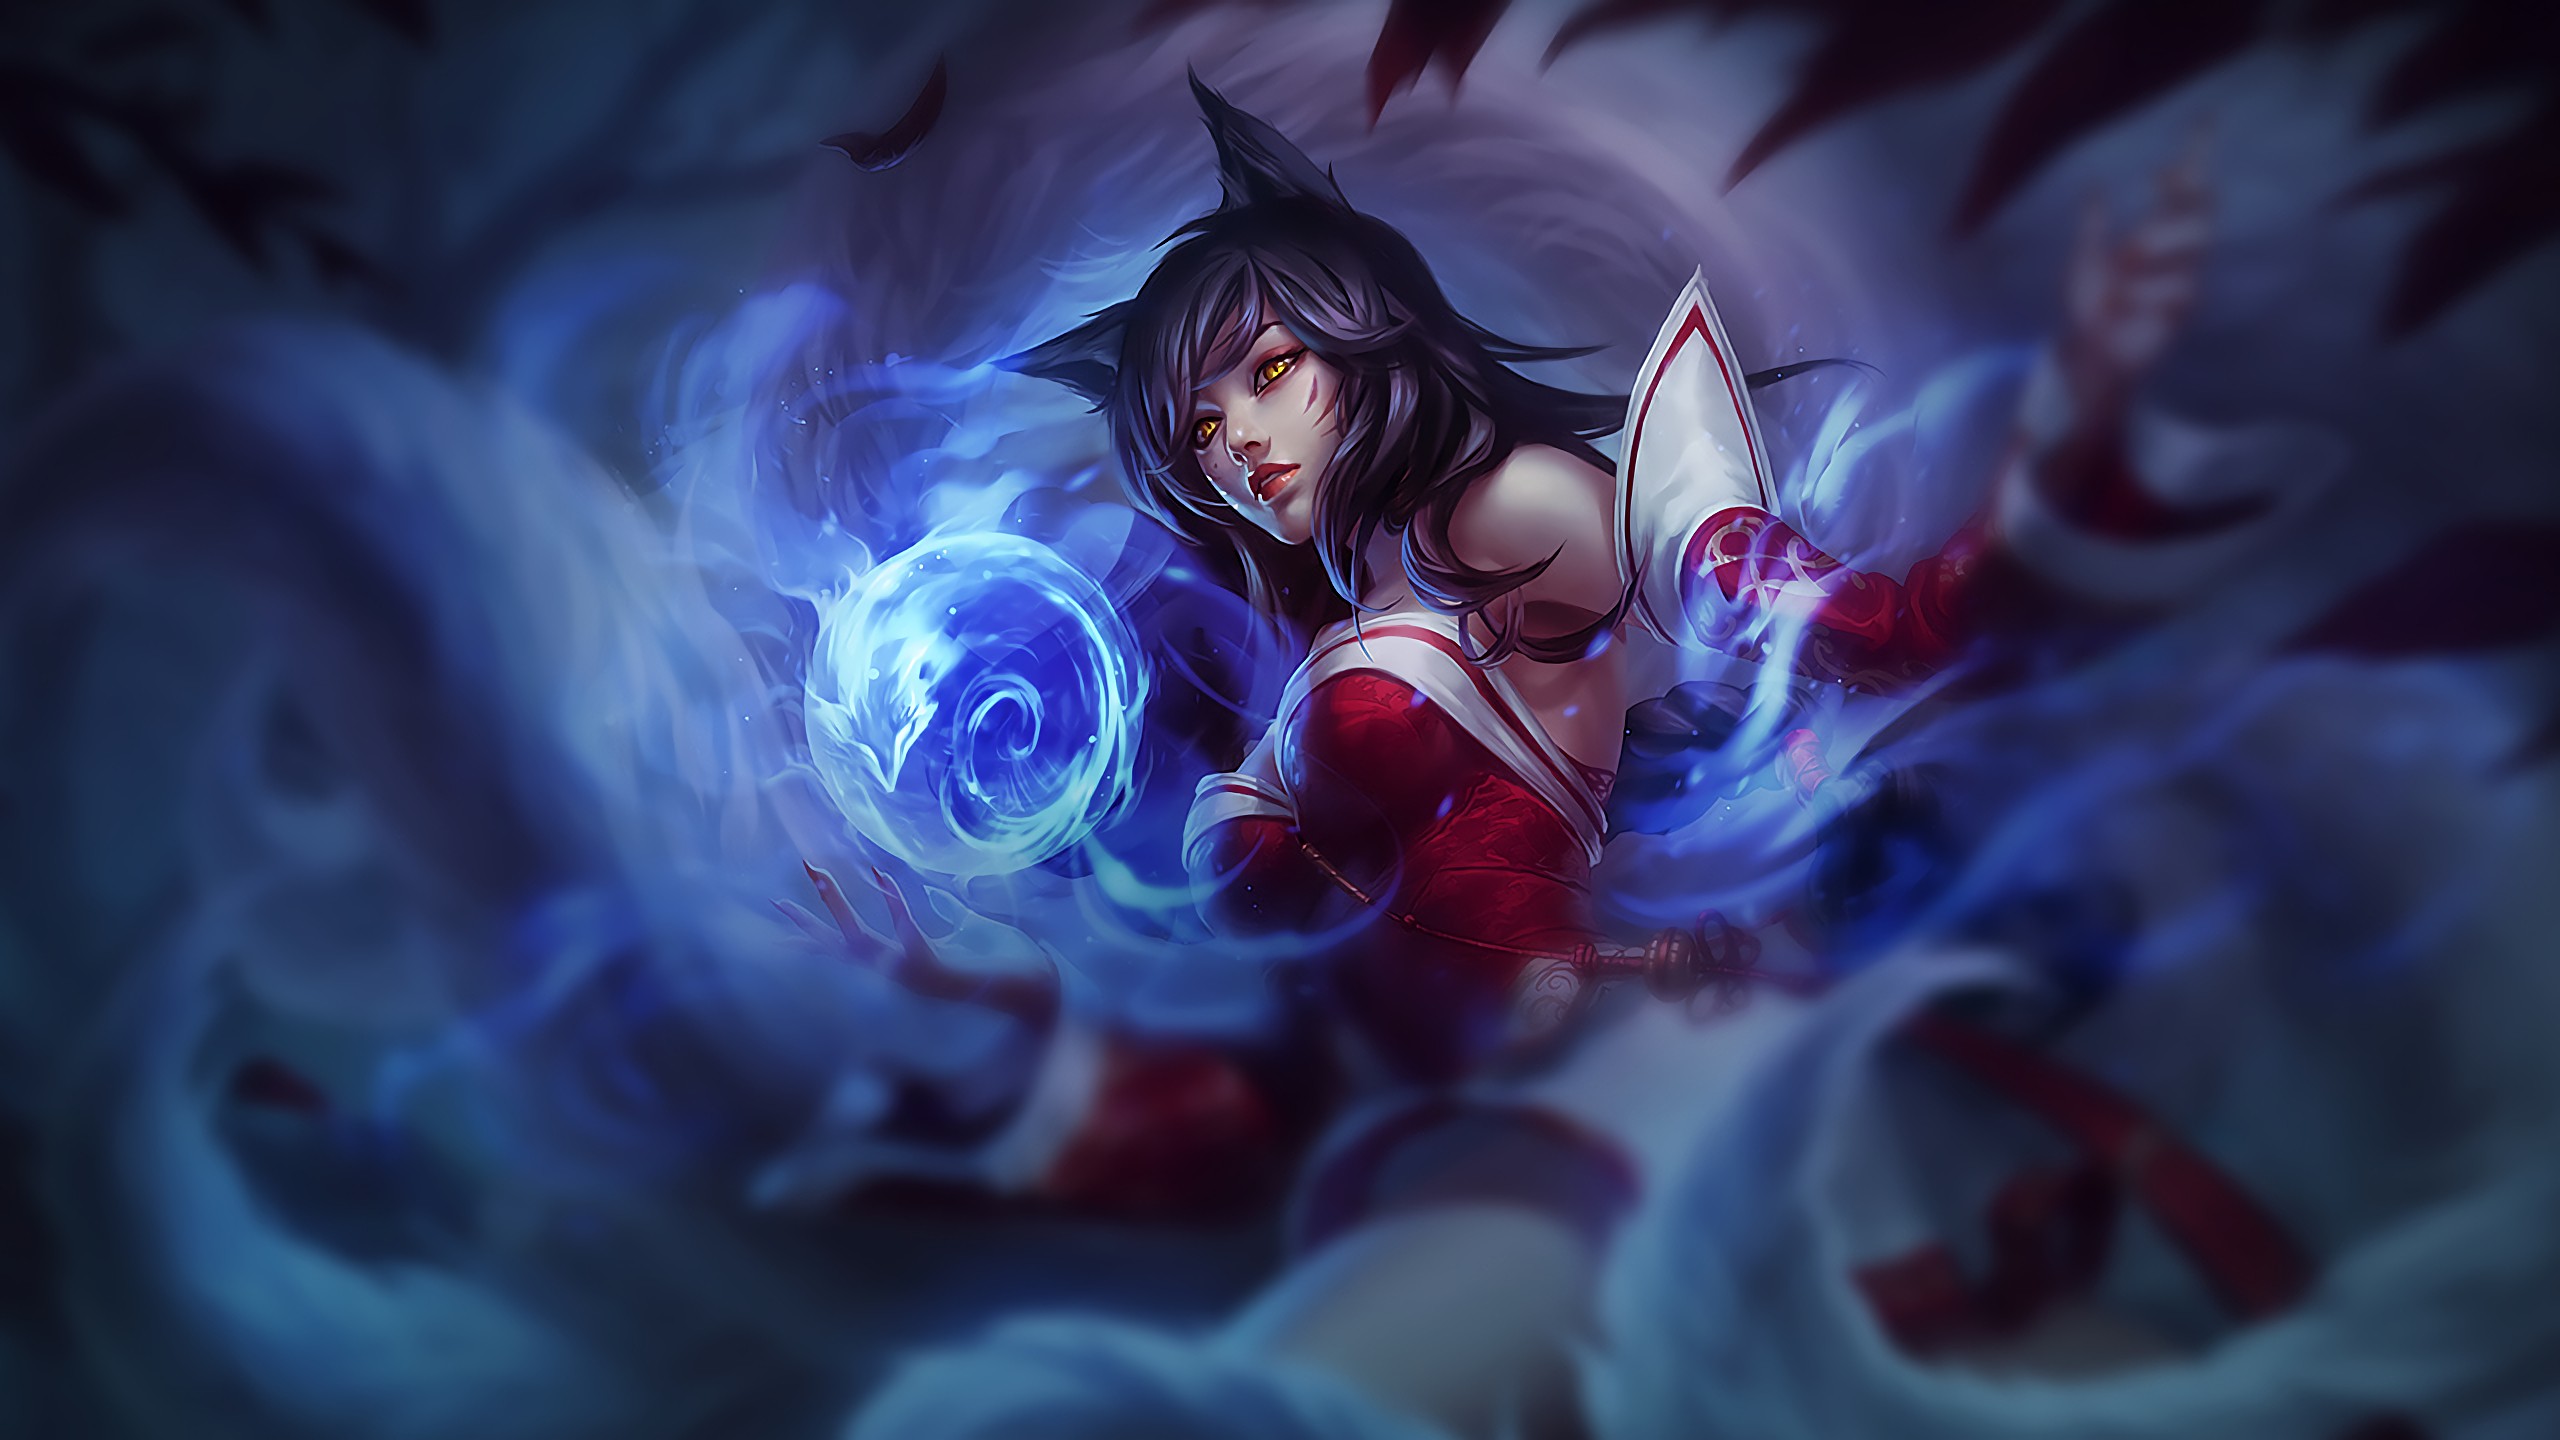 General 2560x1440 League of Legends Ahri (League of Legends) animal ears video game warriors PC gaming fantasy girl video game girls